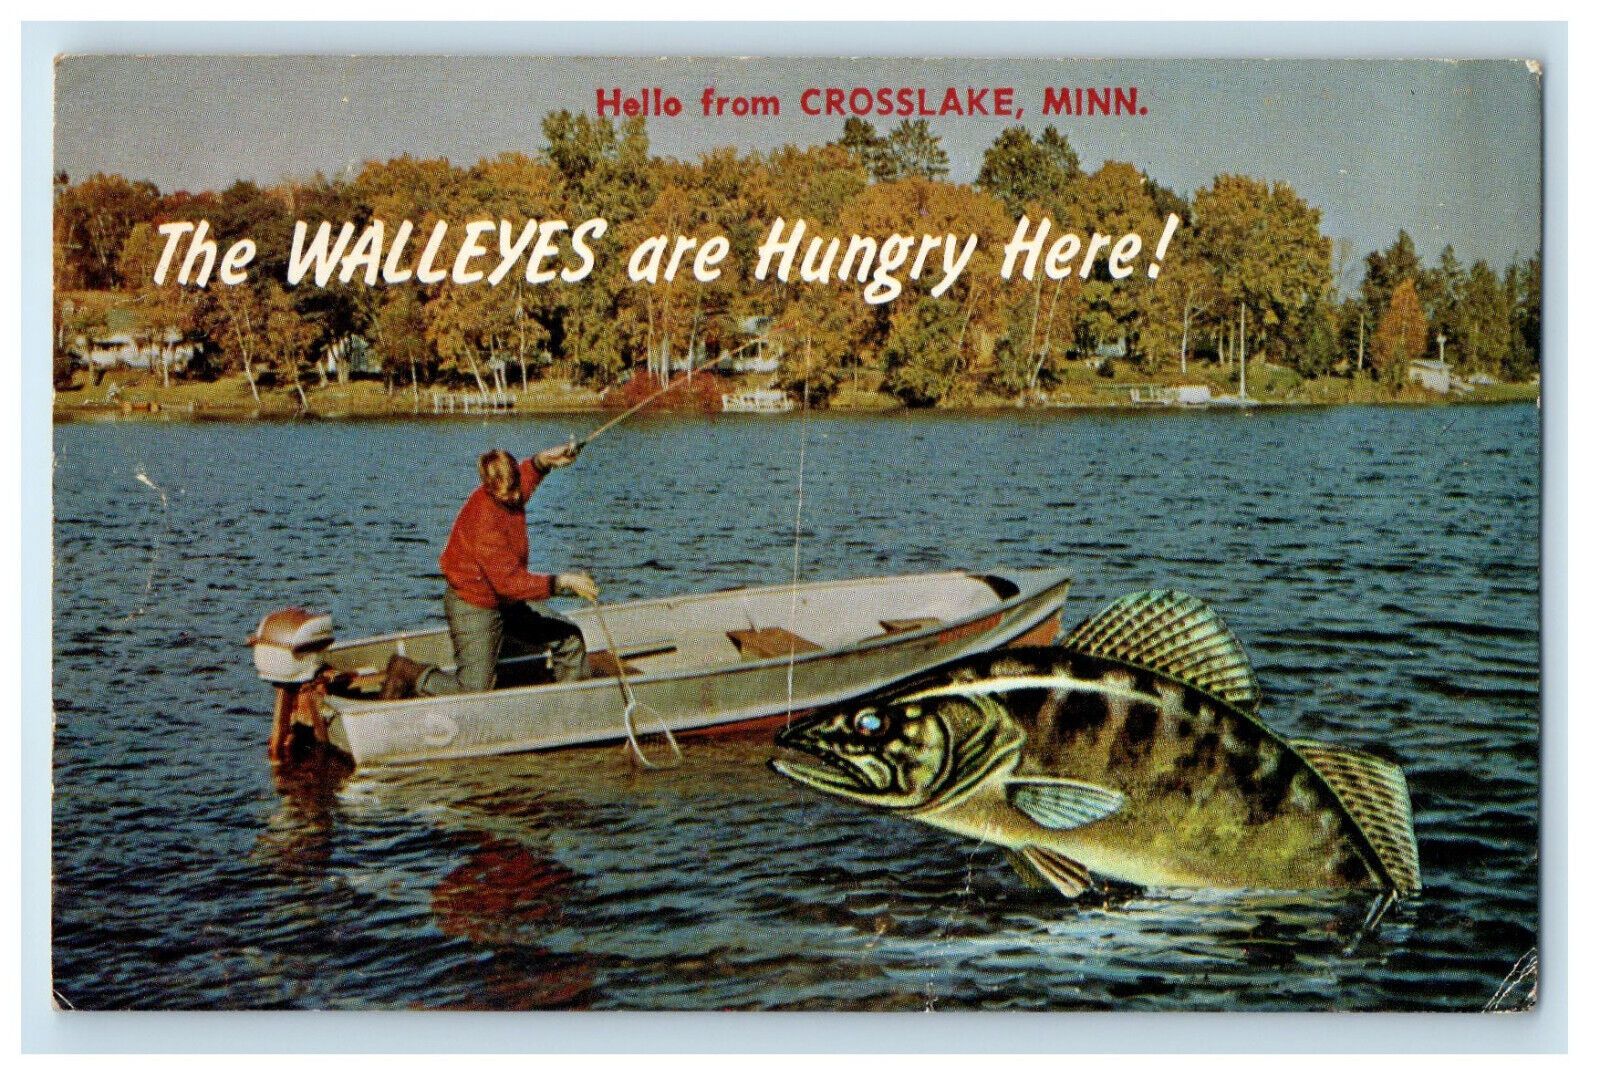 1969 Giant Walleyes Fish, Motorboat, Hello from Crosslake MN Postcard